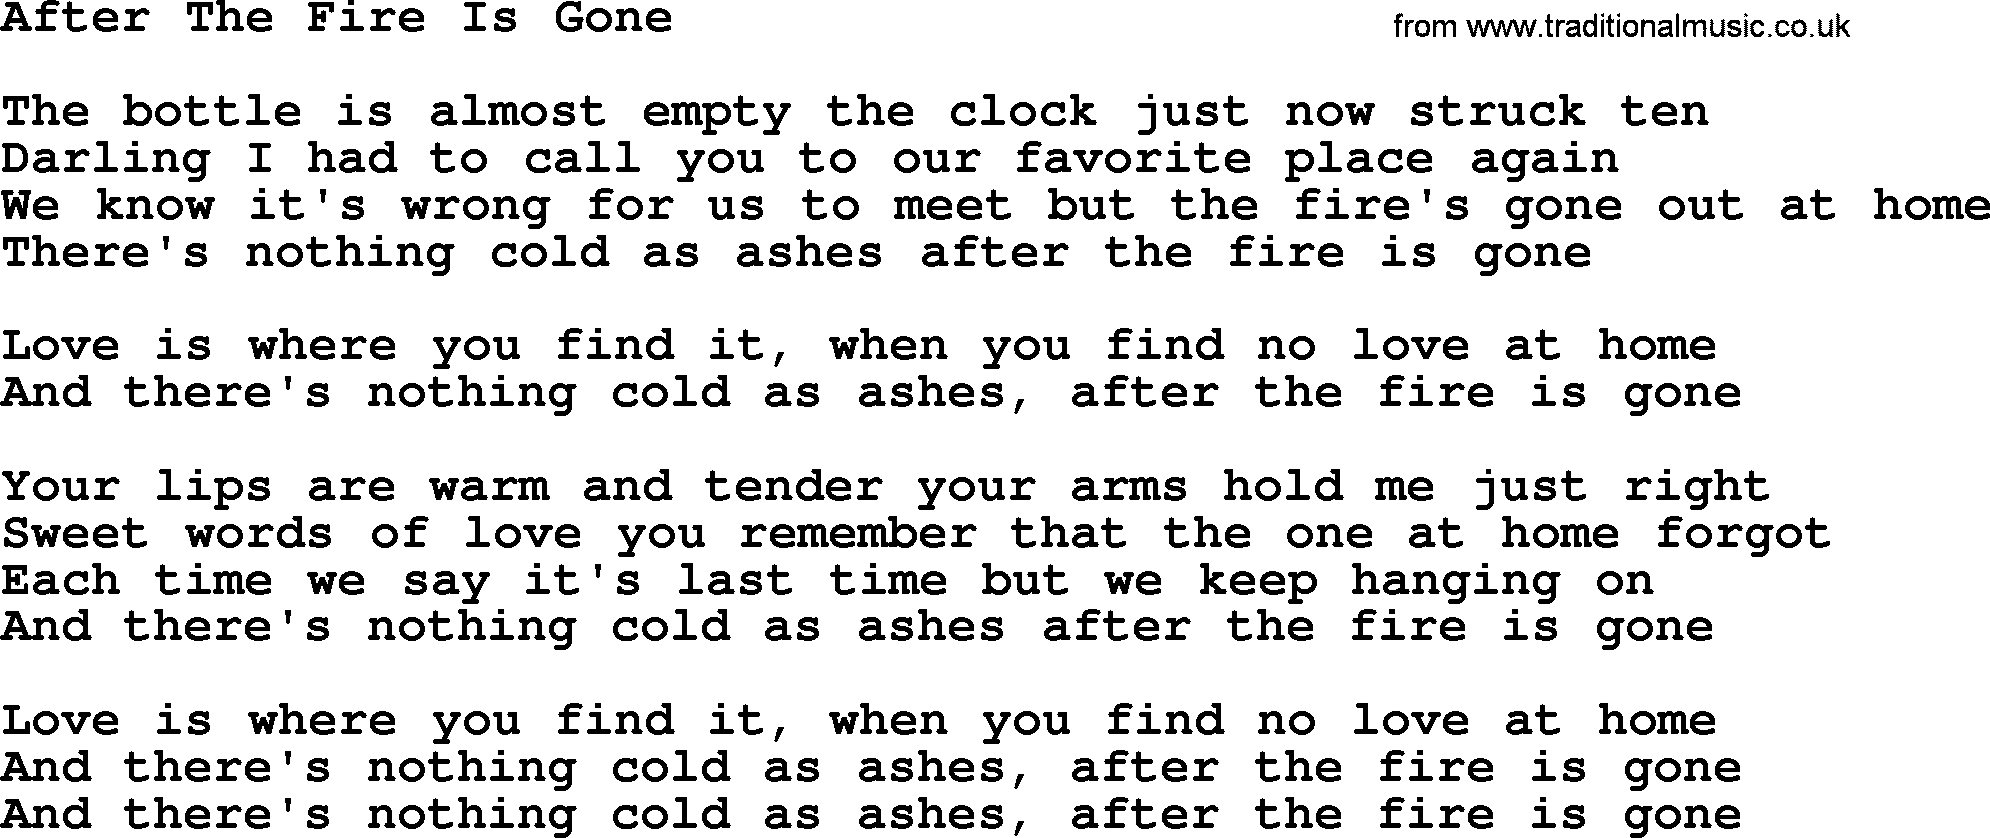 Willie Nelson song: After The Fire Is Gone lyrics